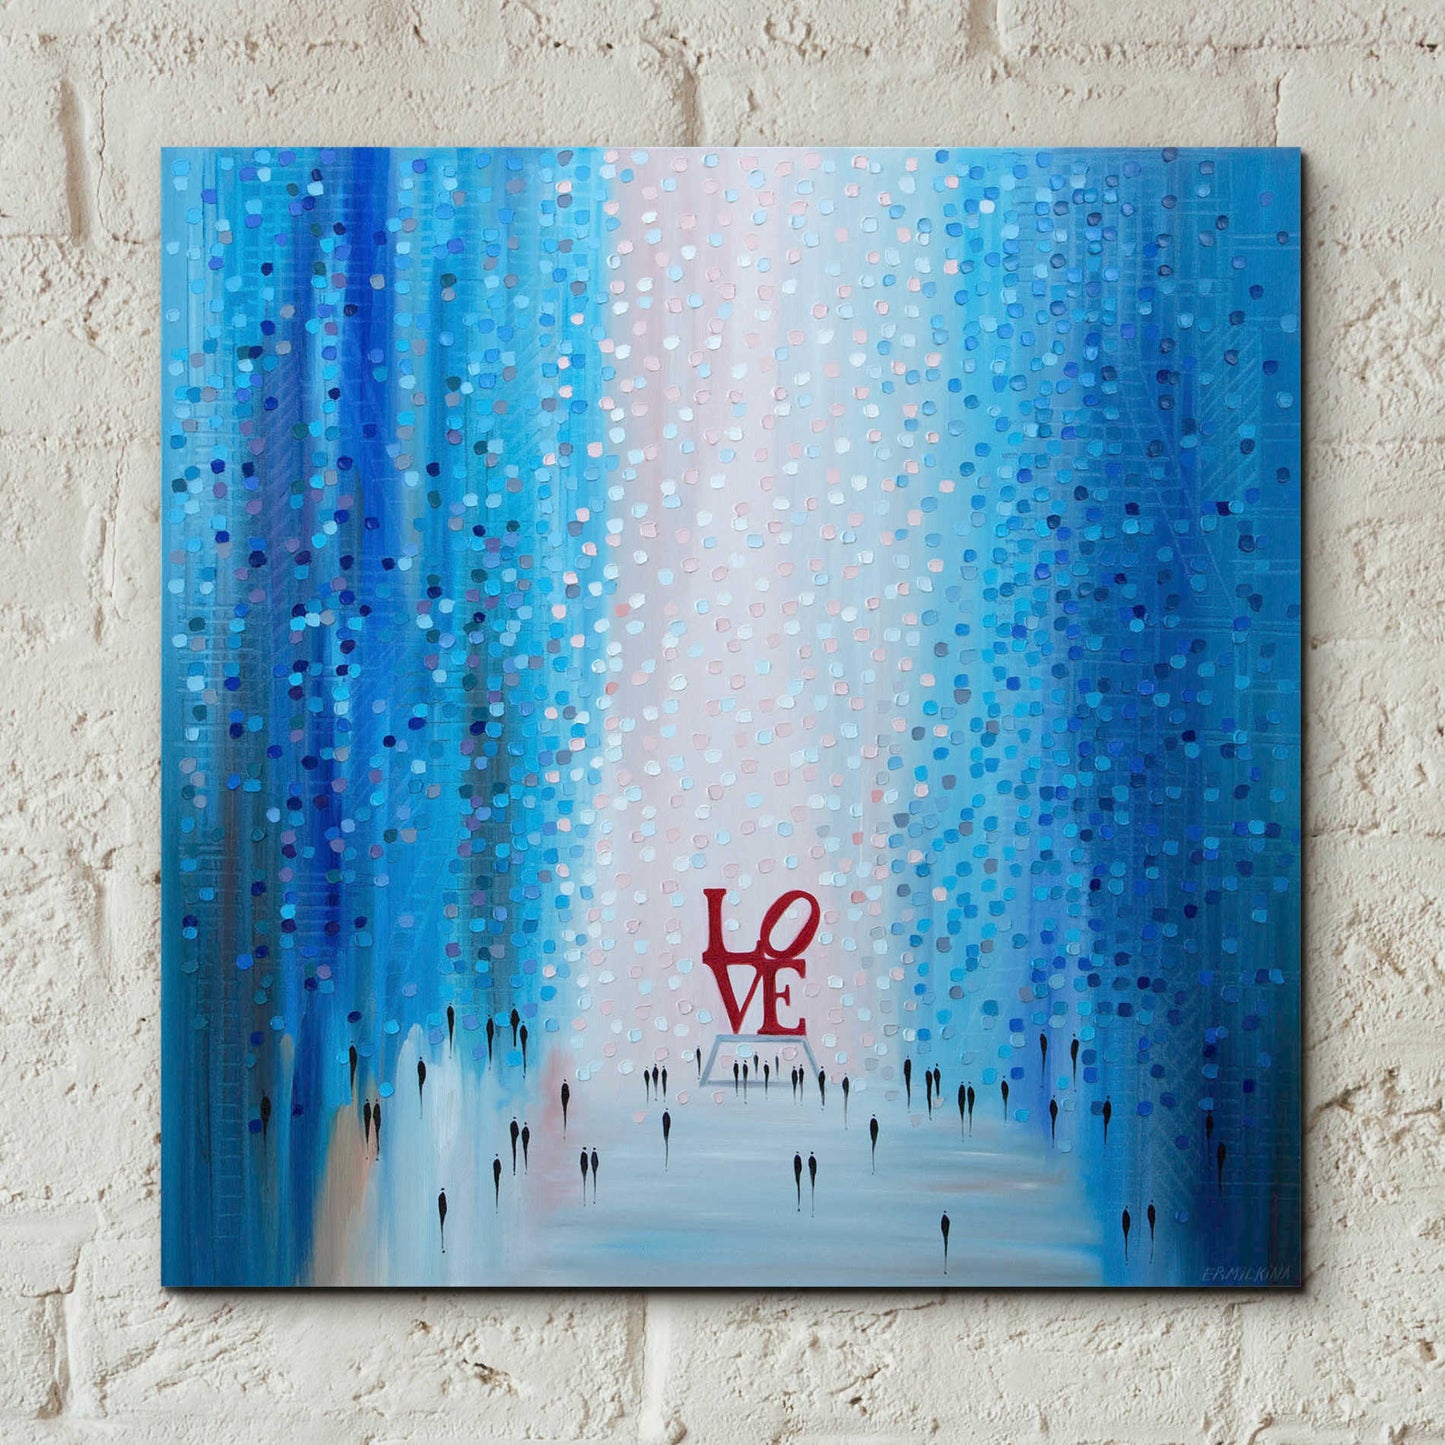 Epic Art 'In Love With You' by Ekaterina Ermilkina, Acrylic Glass Wall Art,12x12